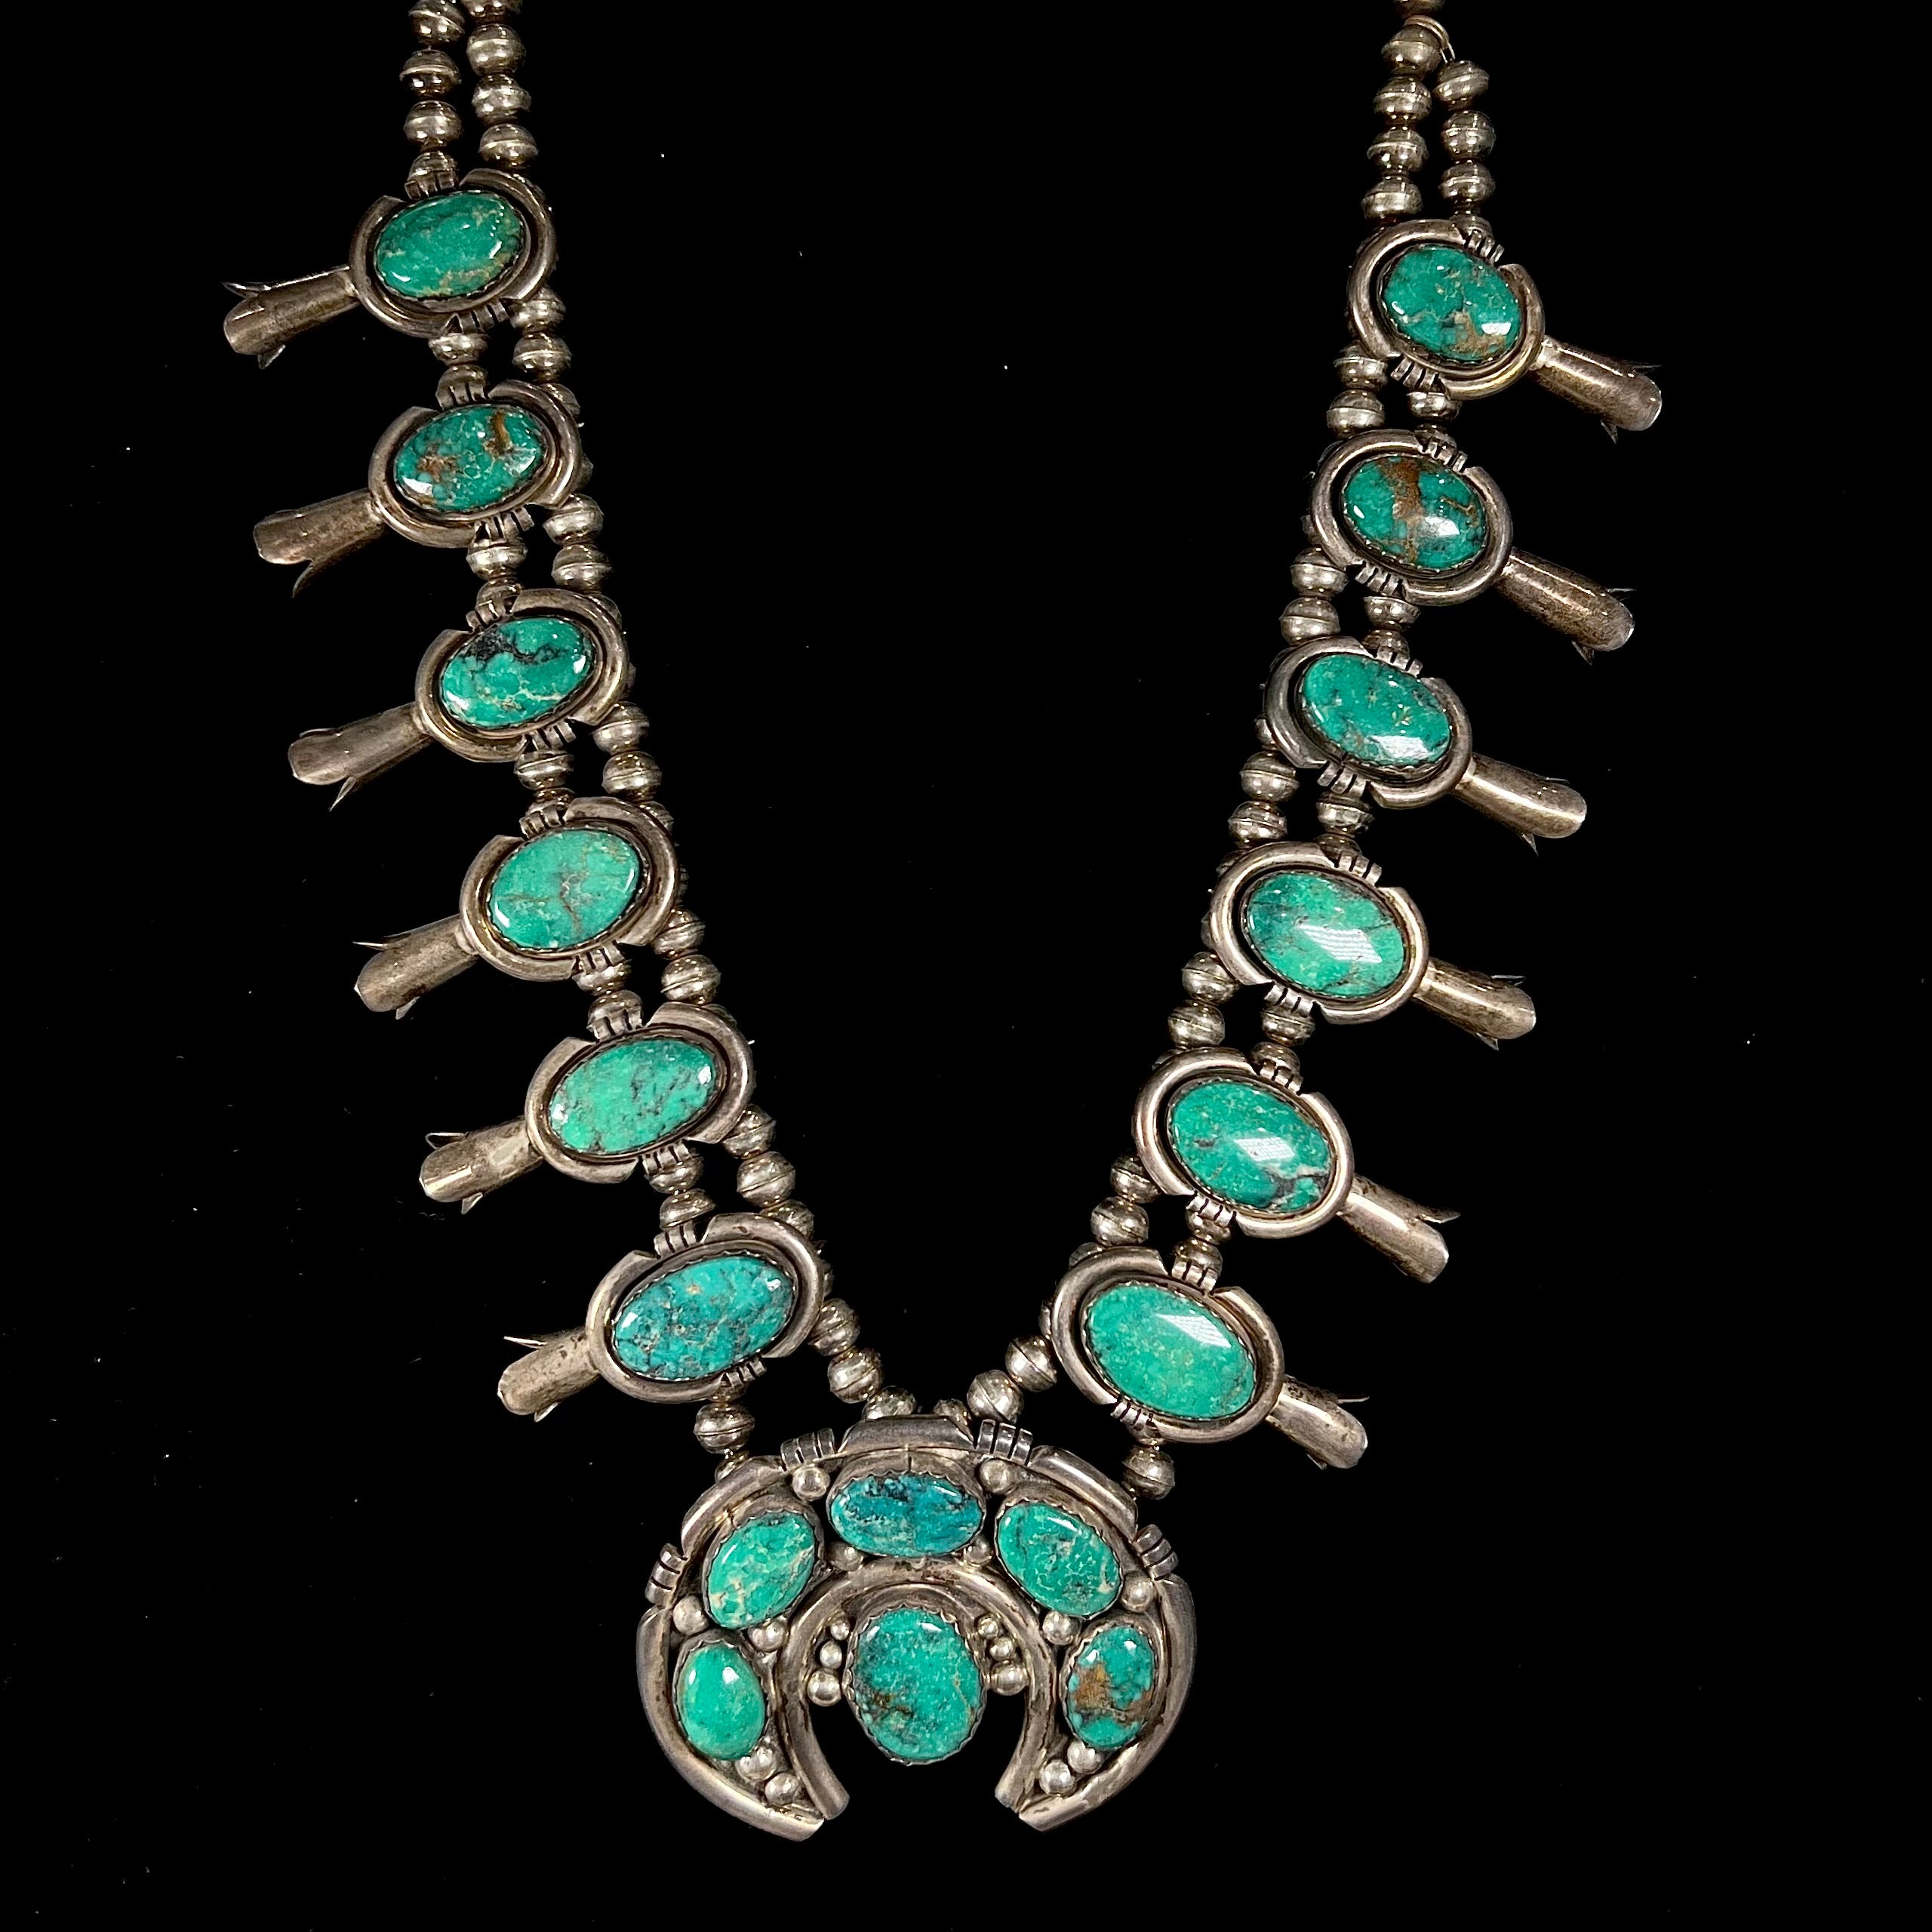 Vintage 231g Turquoise Nugget Squash Blossom Necklace With Matching  Earrings, Native American Indian Jewelry, 1960s Southwestern Fashion - Etsy